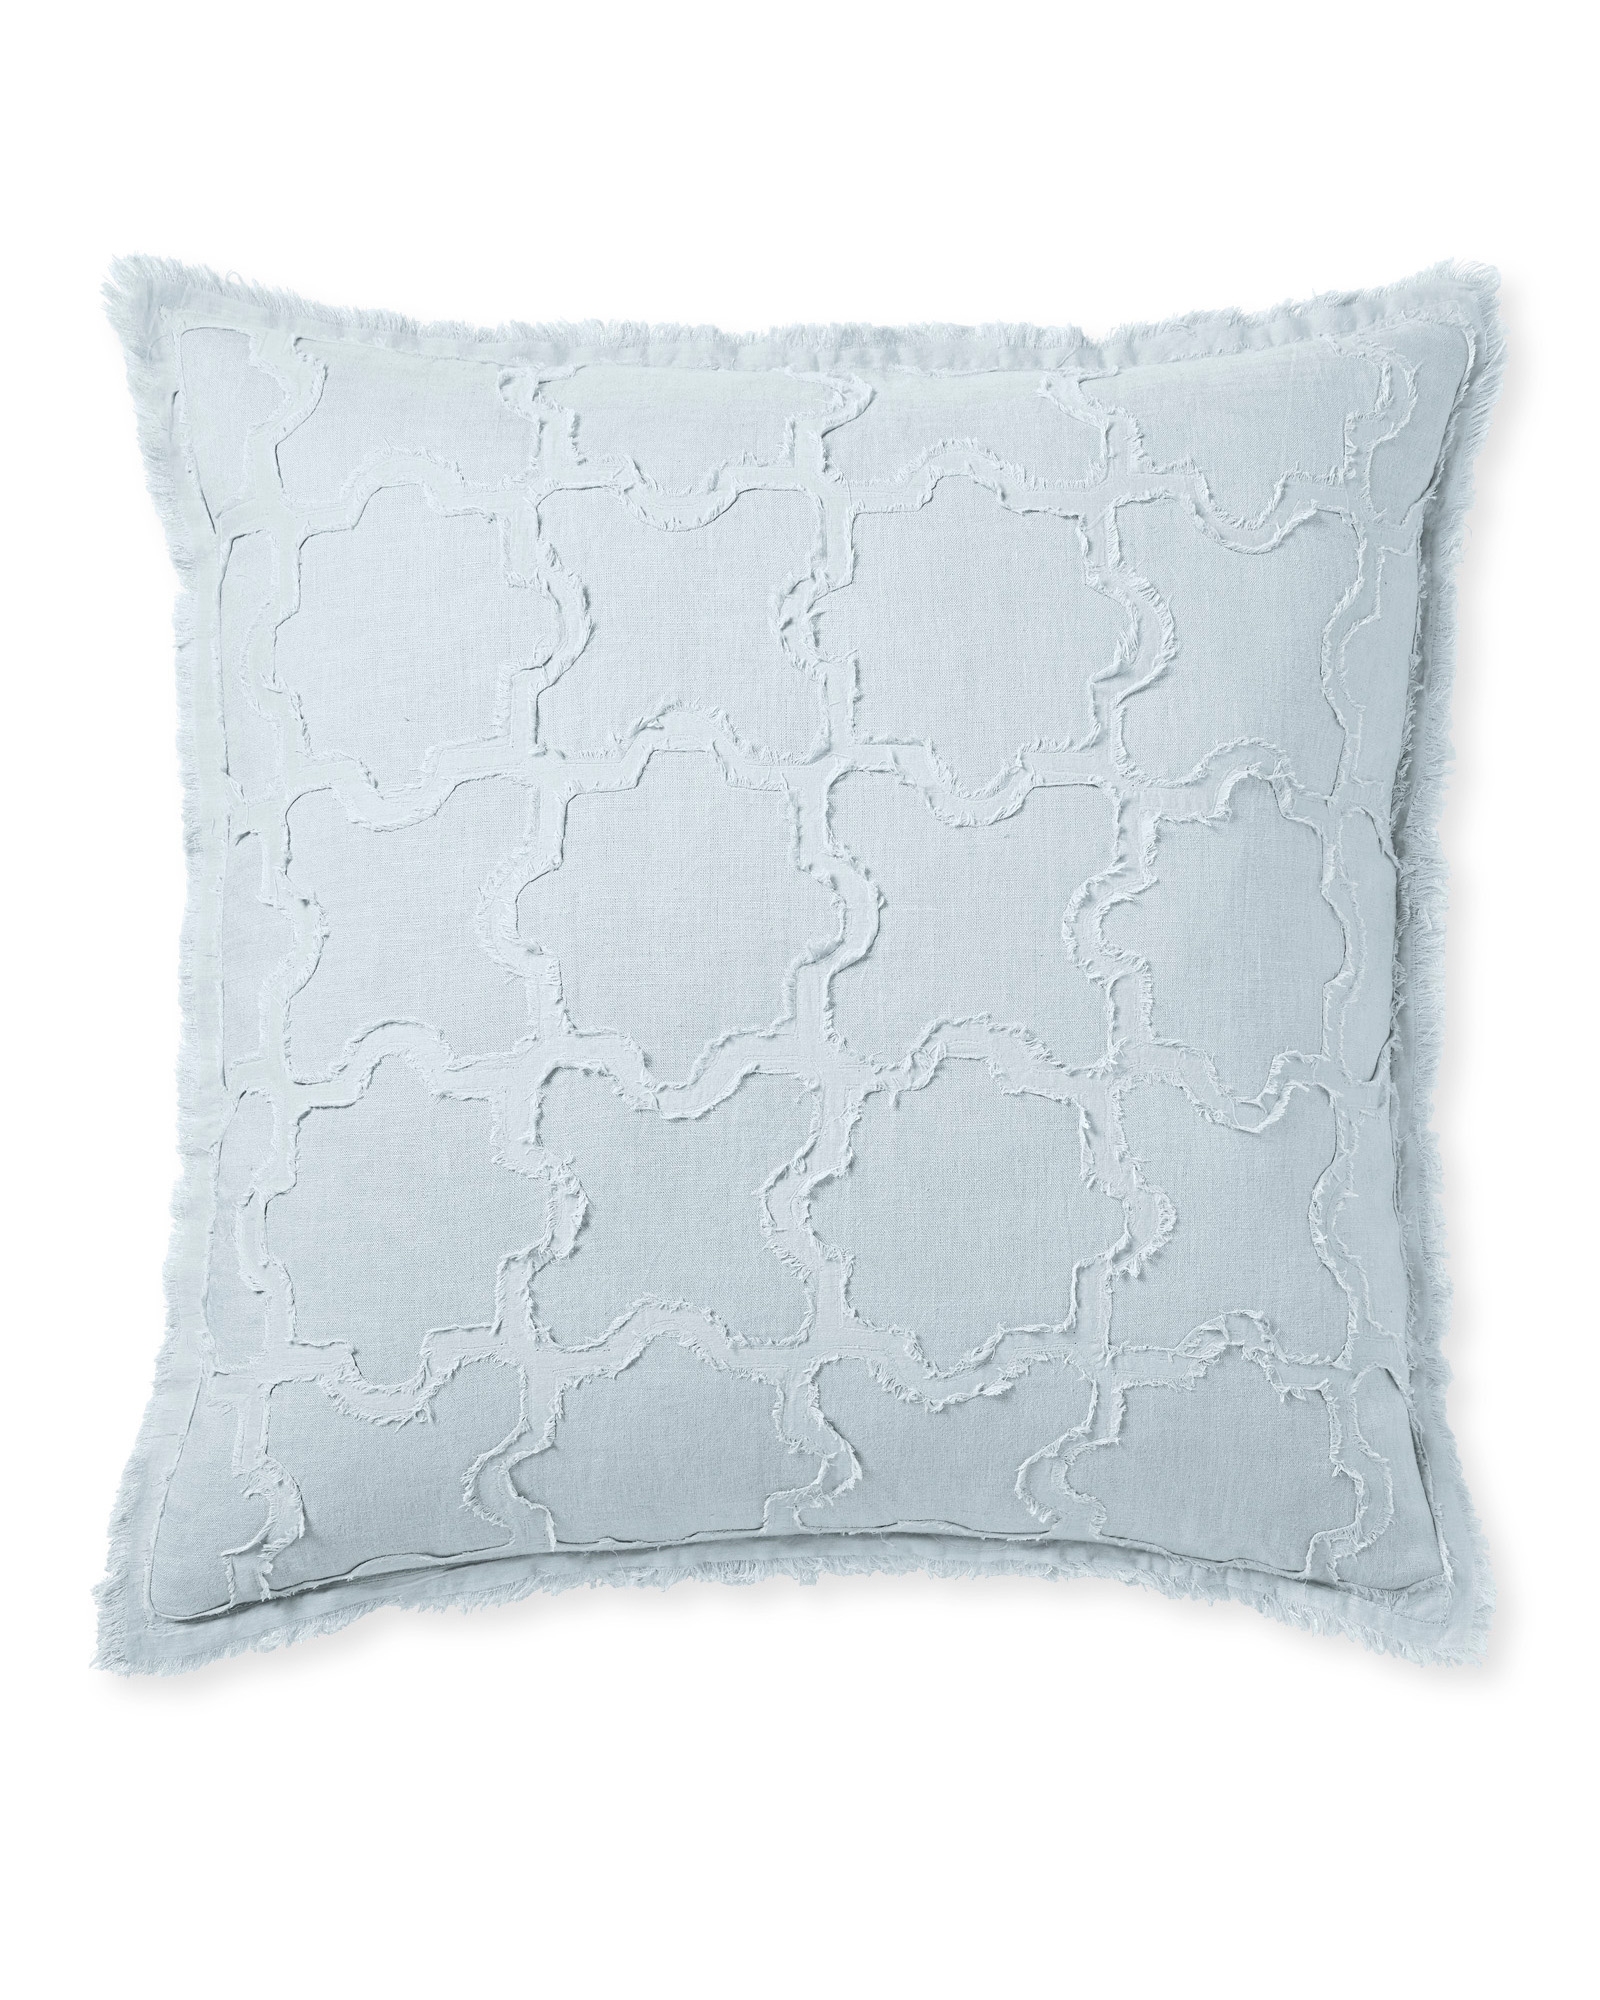 Barcelona Pillow Cover - Image 0